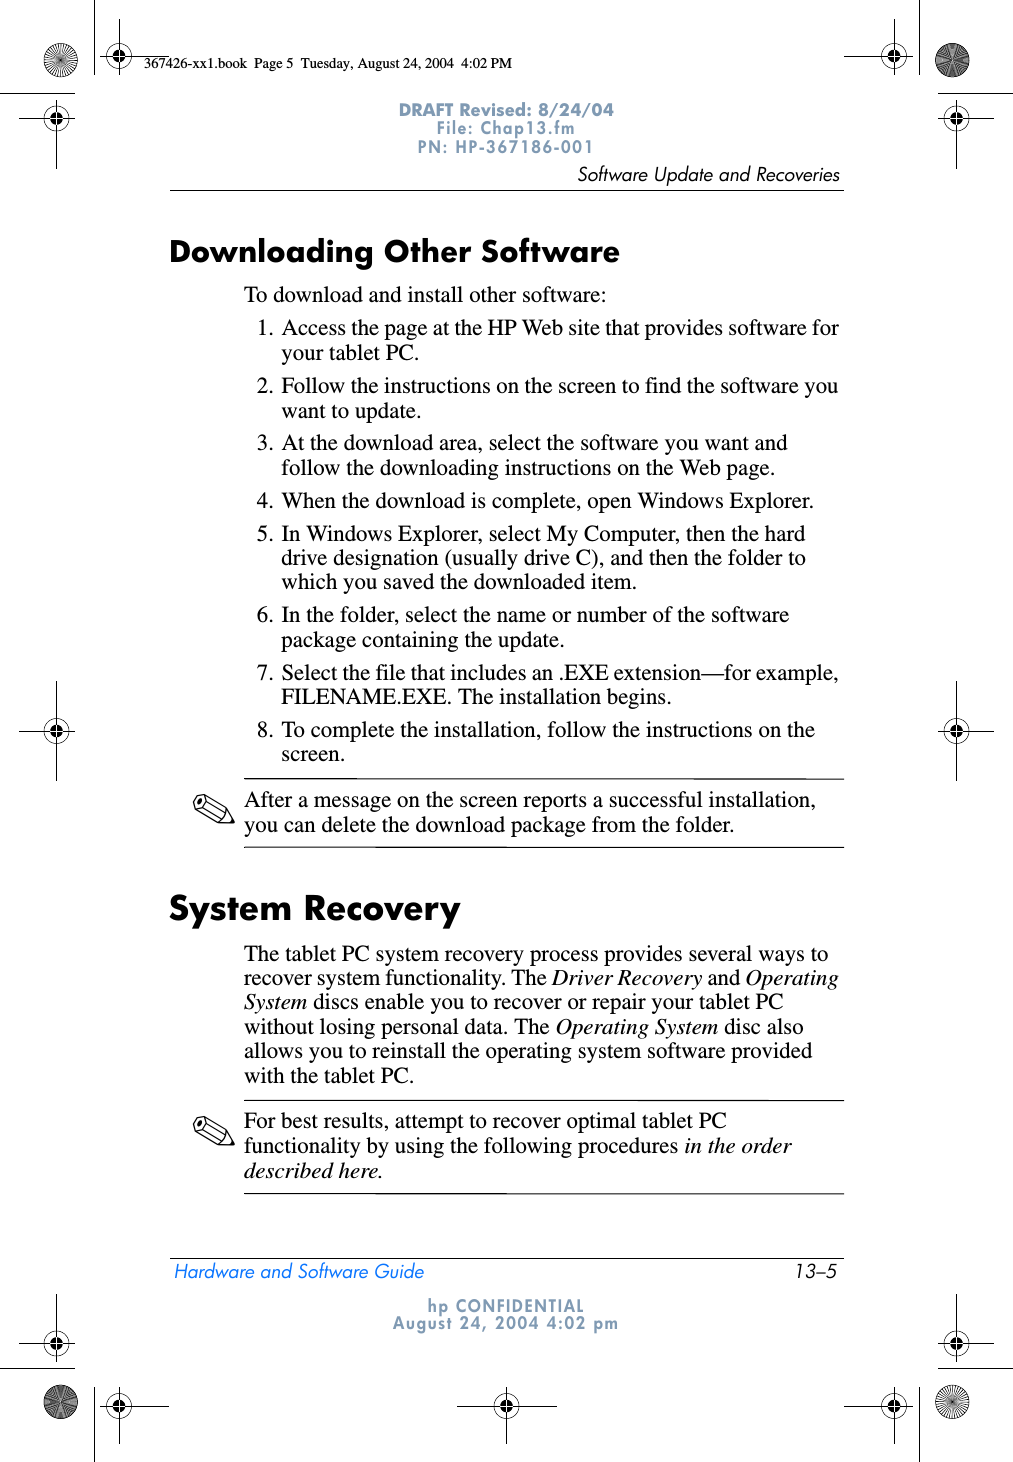 Software Update and RecoveriesHardware and Software Guide 13–5DRAFT Revised: 8/24/04File: Chap13.fm PN: HP-367186-001 hp CONFIDENTIALAugust 24, 2004 4:02 pmDownloading Other SoftwareTo download and install other software:1. Access the page at the HP Web site that provides software for your tablet PC.2. Follow the instructions on the screen to find the software you want to update.3. At the download area, select the software you want and follow the downloading instructions on the Web page.4. When the download is complete, open Windows Explorer.5. In Windows Explorer, select My Computer, then the hard drive designation (usually drive C), and then the folder to which you saved the downloaded item.6. In the folder, select the name or number of the software package containing the update.7. Select the file that includes an .EXE extension—for example, FILENAME.EXE. The installation begins.8. To complete the installation, follow the instructions on the screen.✎After a message on the screen reports a successful installation, you can delete the download package from the folder.System RecoveryThe tablet PC system recovery process provides several ways to recover system functionality. The Driver Recovery and Operating System discs enable you to recover or repair your tablet PC without losing personal data. The Operating System disc also allows you to reinstall the operating system software provided with the tablet PC.✎For best results, attempt to recover optimal tablet PC functionality by using the following procedures in the order described here.367426-xx1.book  Page 5  Tuesday, August 24, 2004  4:02 PM